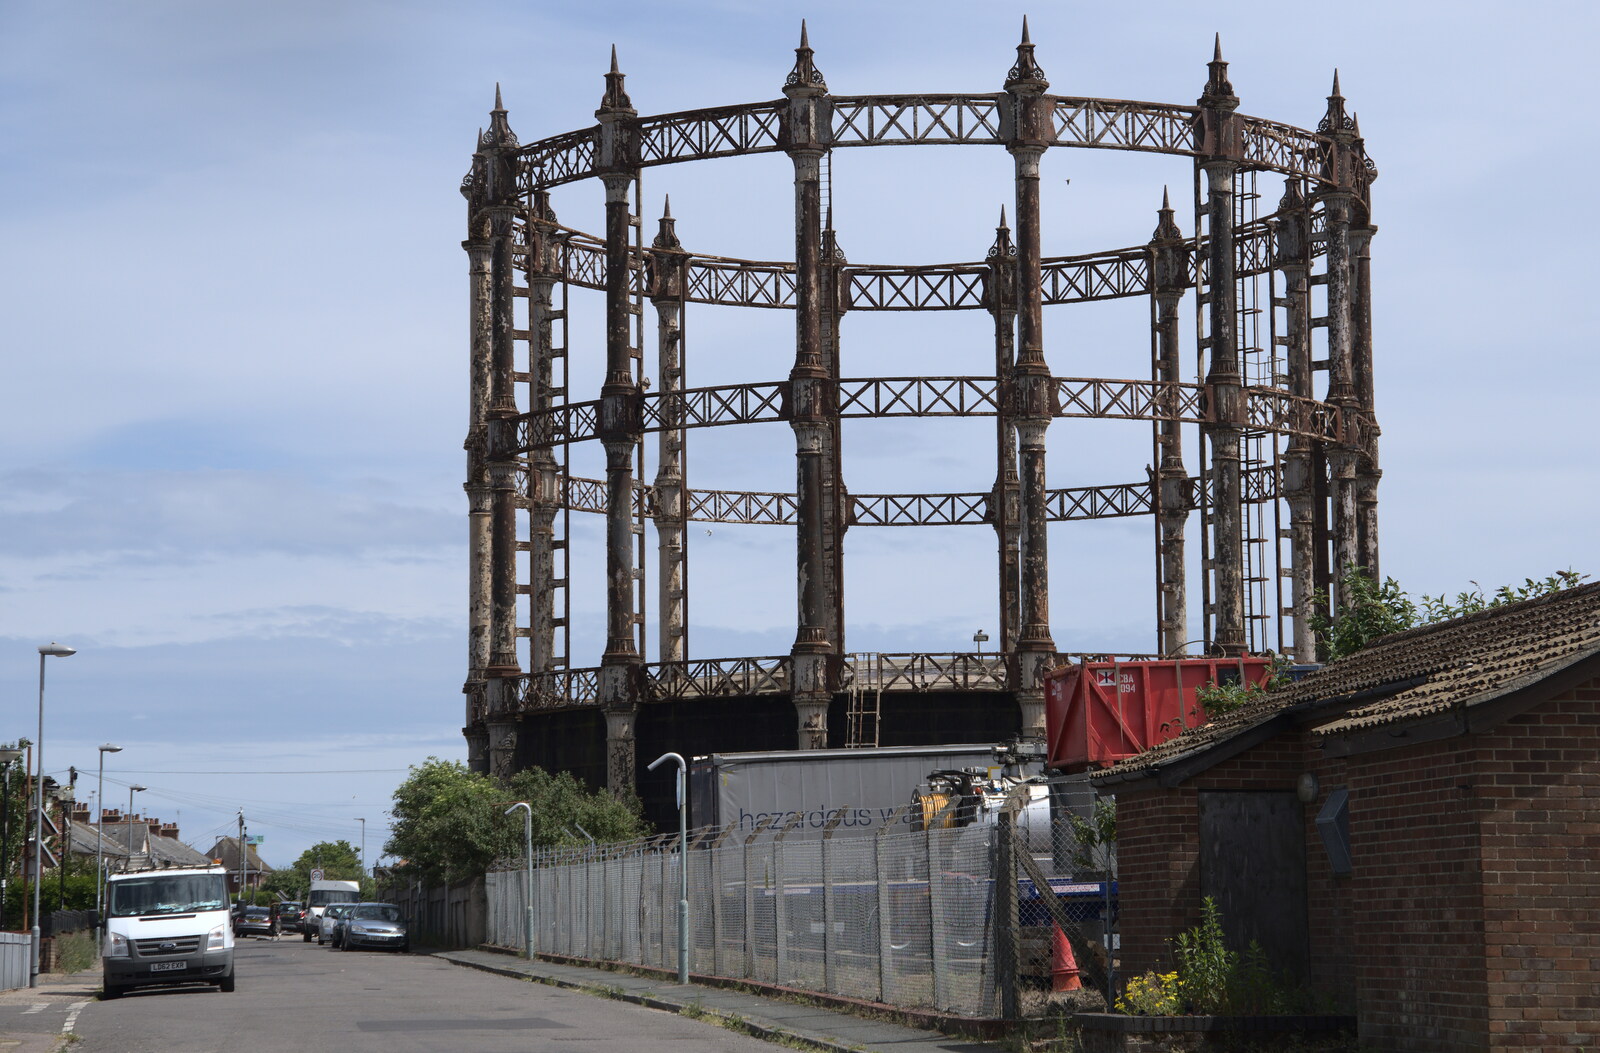 A cool old Gasometer down by the docks from Faded Seaside Glamour: A Weekend in Great Yarmouth, Norfolk - 29th May 2022